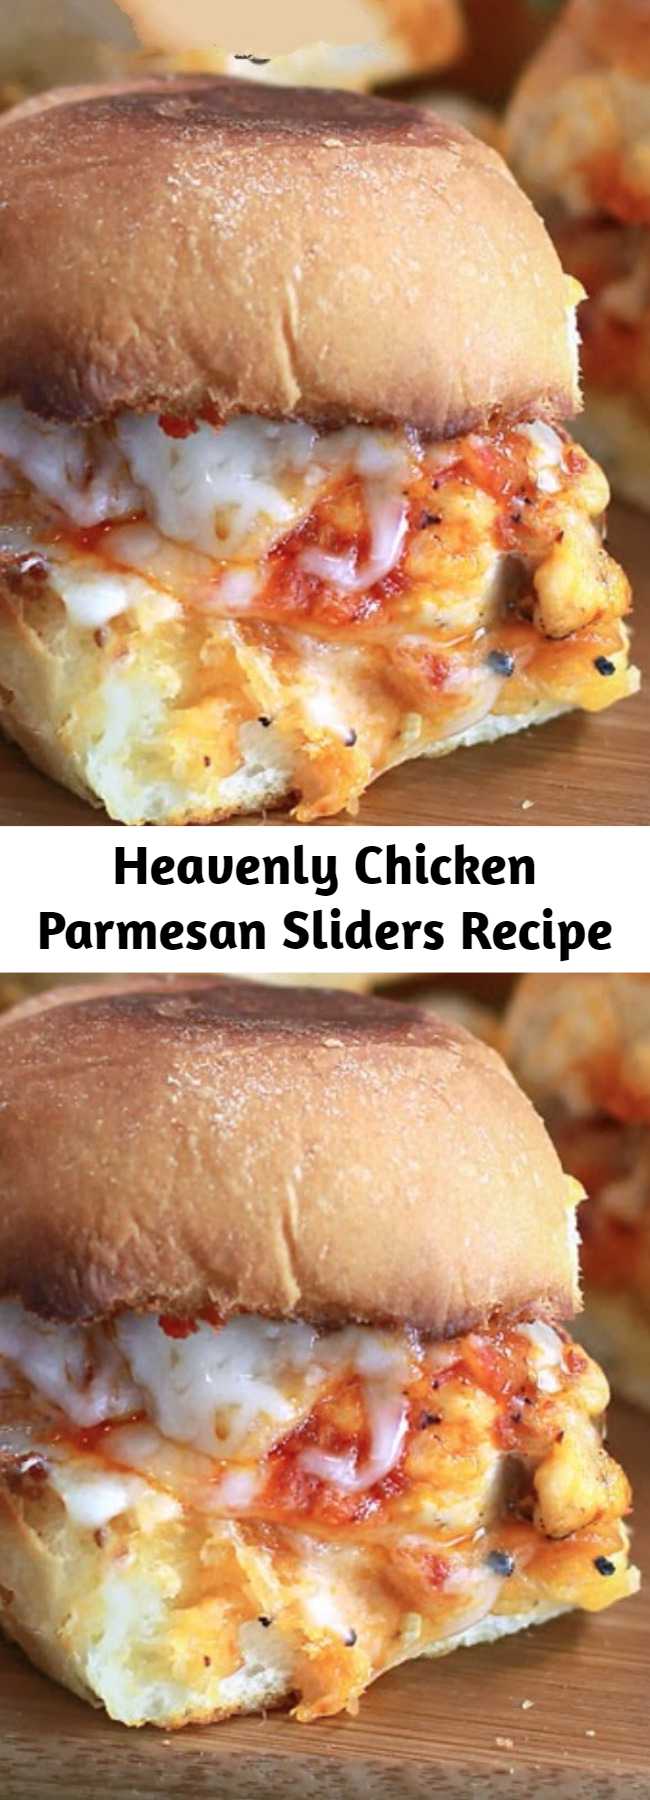 Heavenly Chicken Parmesan Sliders Recipe - Chicken Parmesan Sliders are sweet dinner rolls toasted with garlic butter and topped with Parmesan cheese. Slices of pan-fried chicken, marinara sauce and piles of mozzarella cheese top this picture perfect slider. It is a simple recipe that is absolutely heavenly and party-ready! #sliders #chickenparmesan